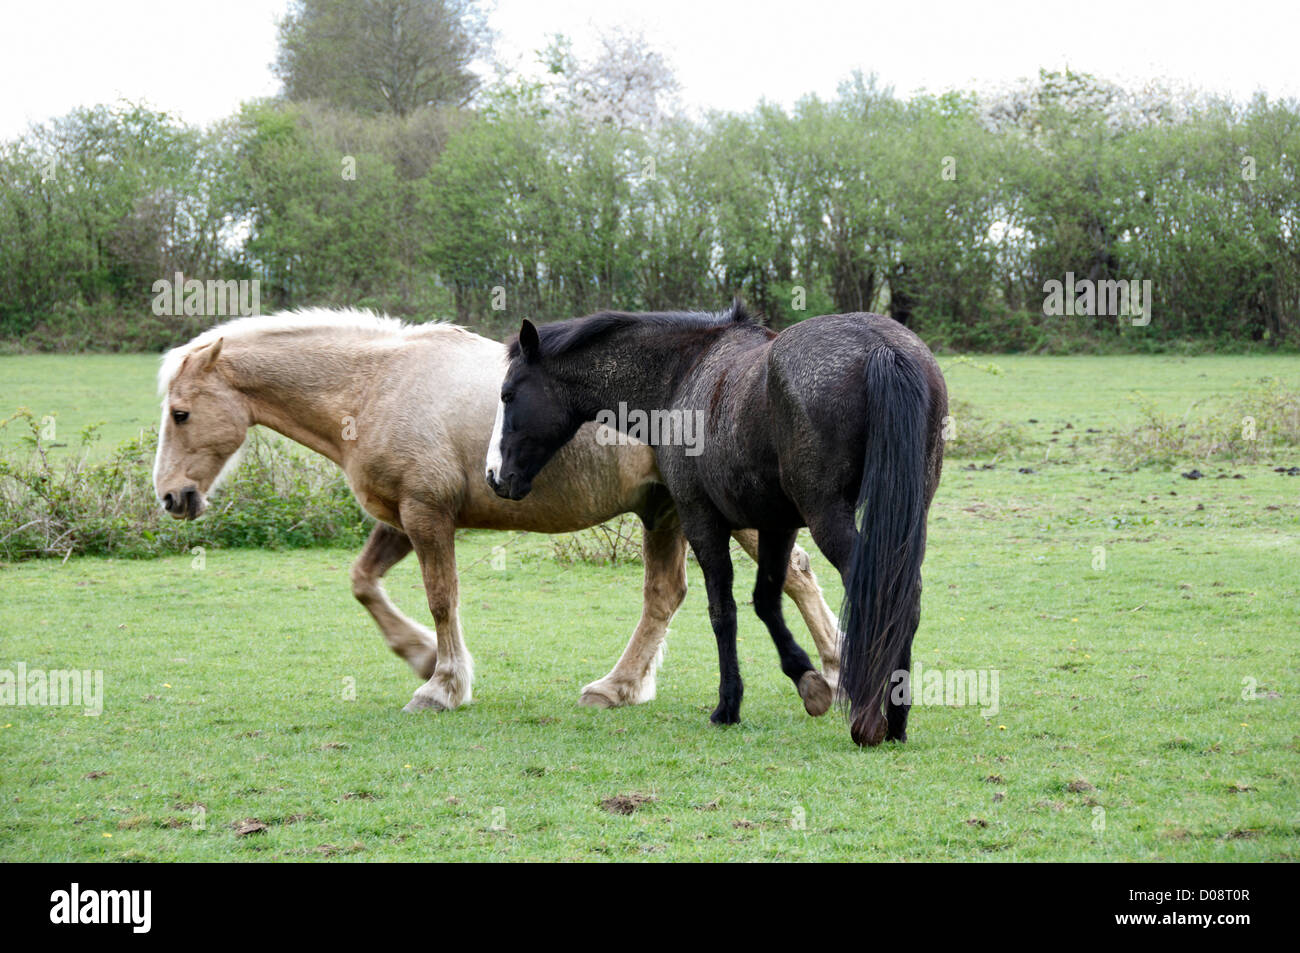 Two horses in a field with trees in the background Stock Photo